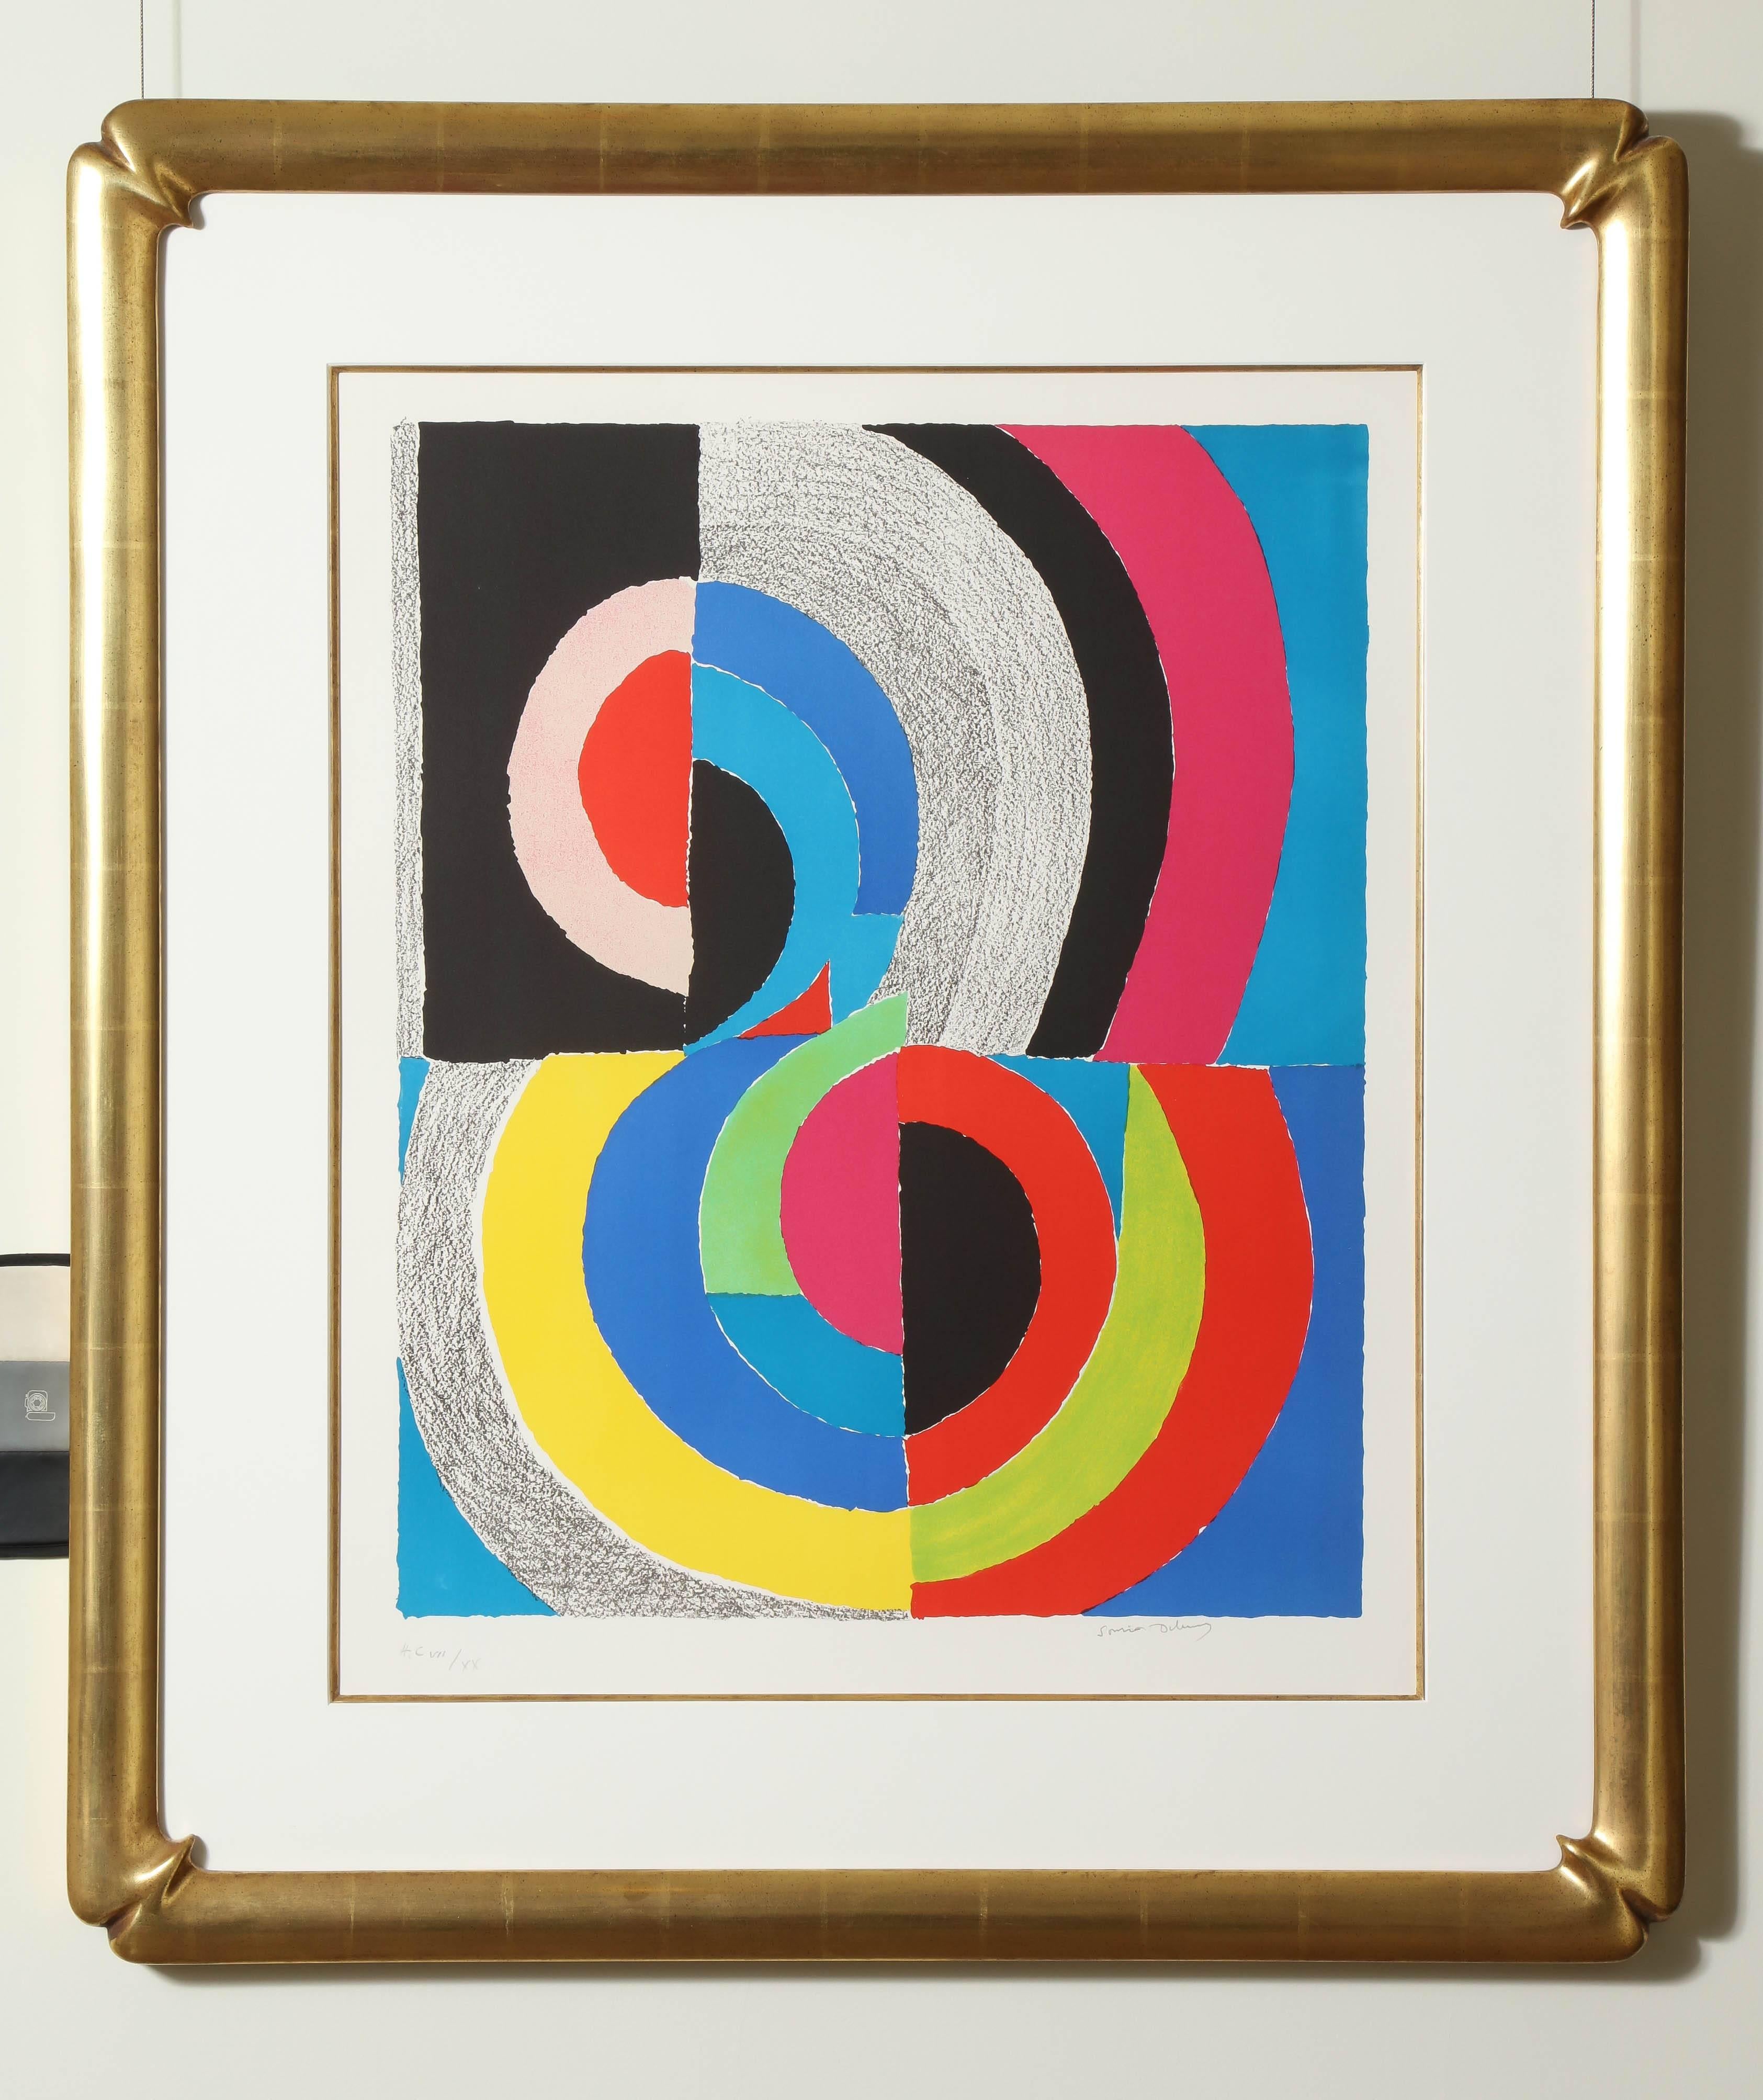 Measure: Sheet: 30" high; 22" wide.
Framed: 36 3/4"; 32 1/4" wide.

Lithograph in colors on Arches paper published by Galerie de Varenne, Paris, with full margins in good condition
Edition of 75 (total included 20 hours